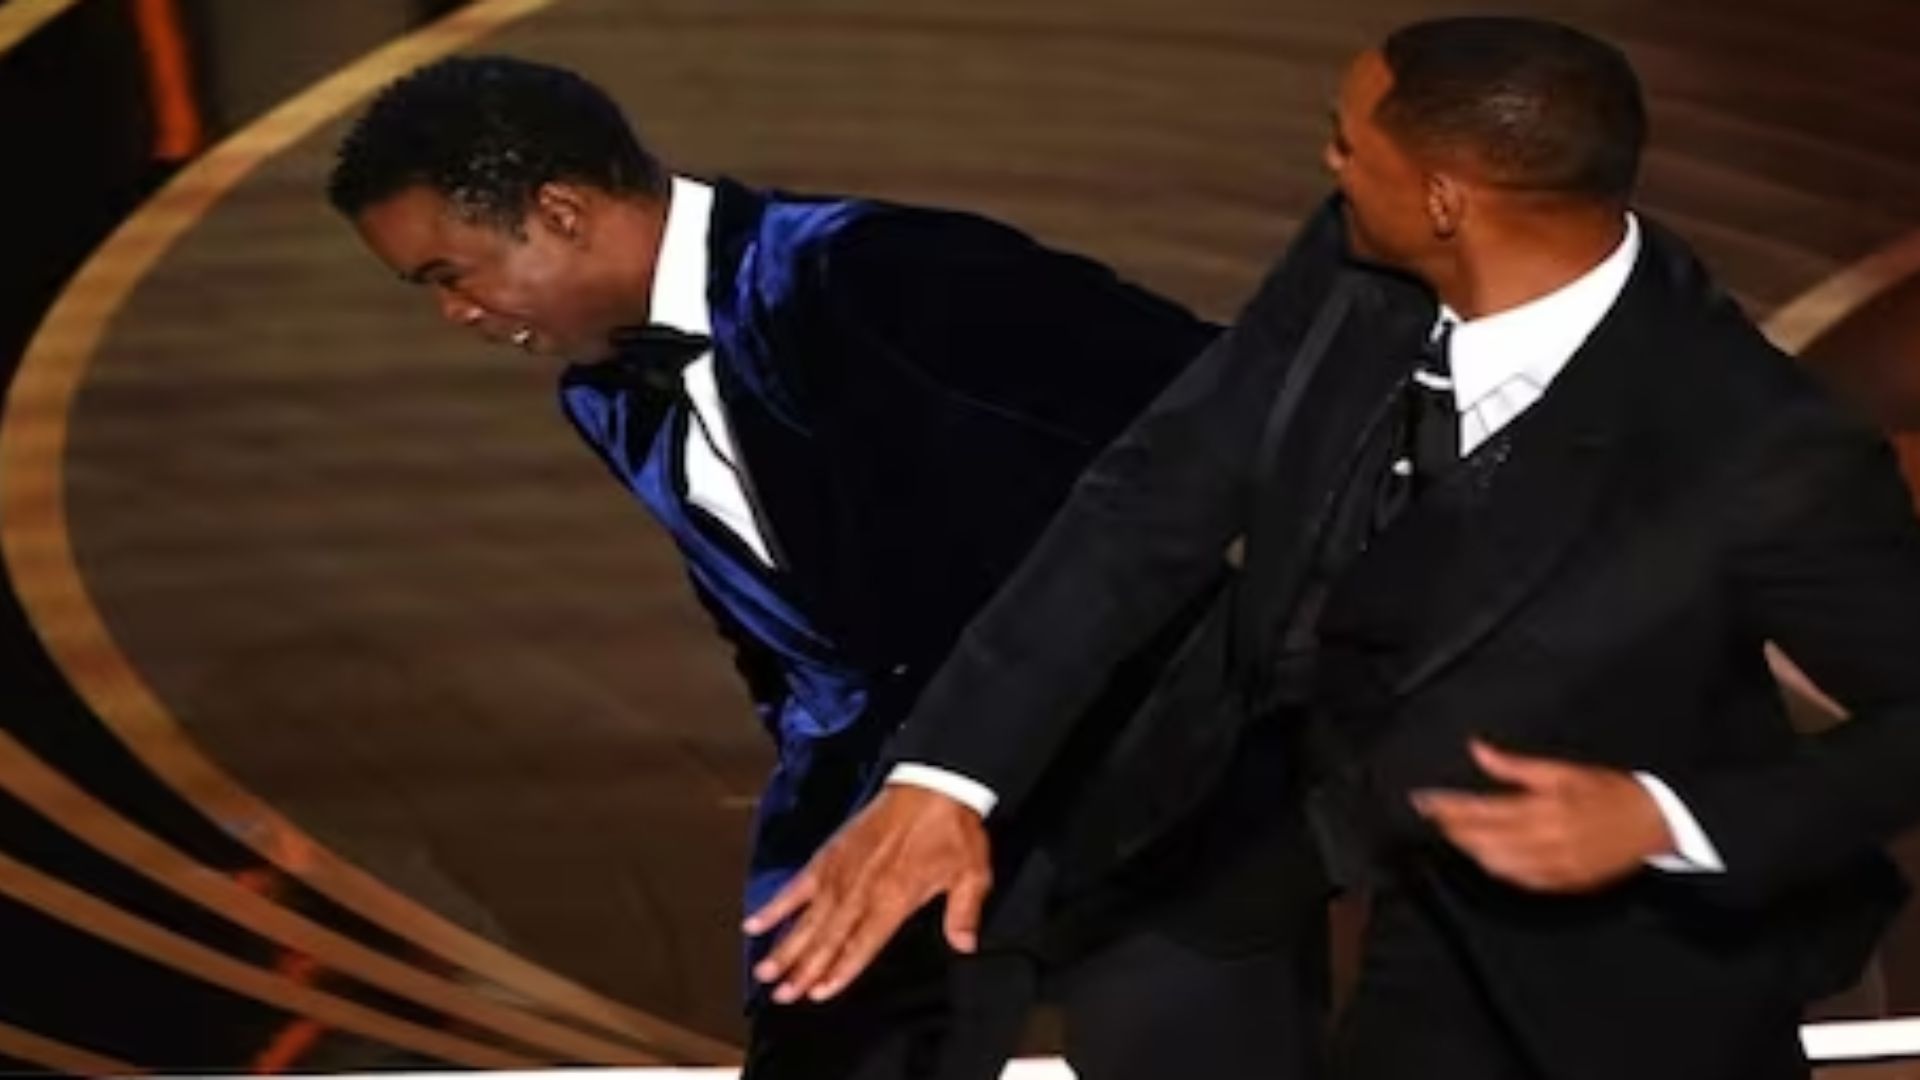 Oscars 2023 Backup to keep away from Will Smith-type slap incident